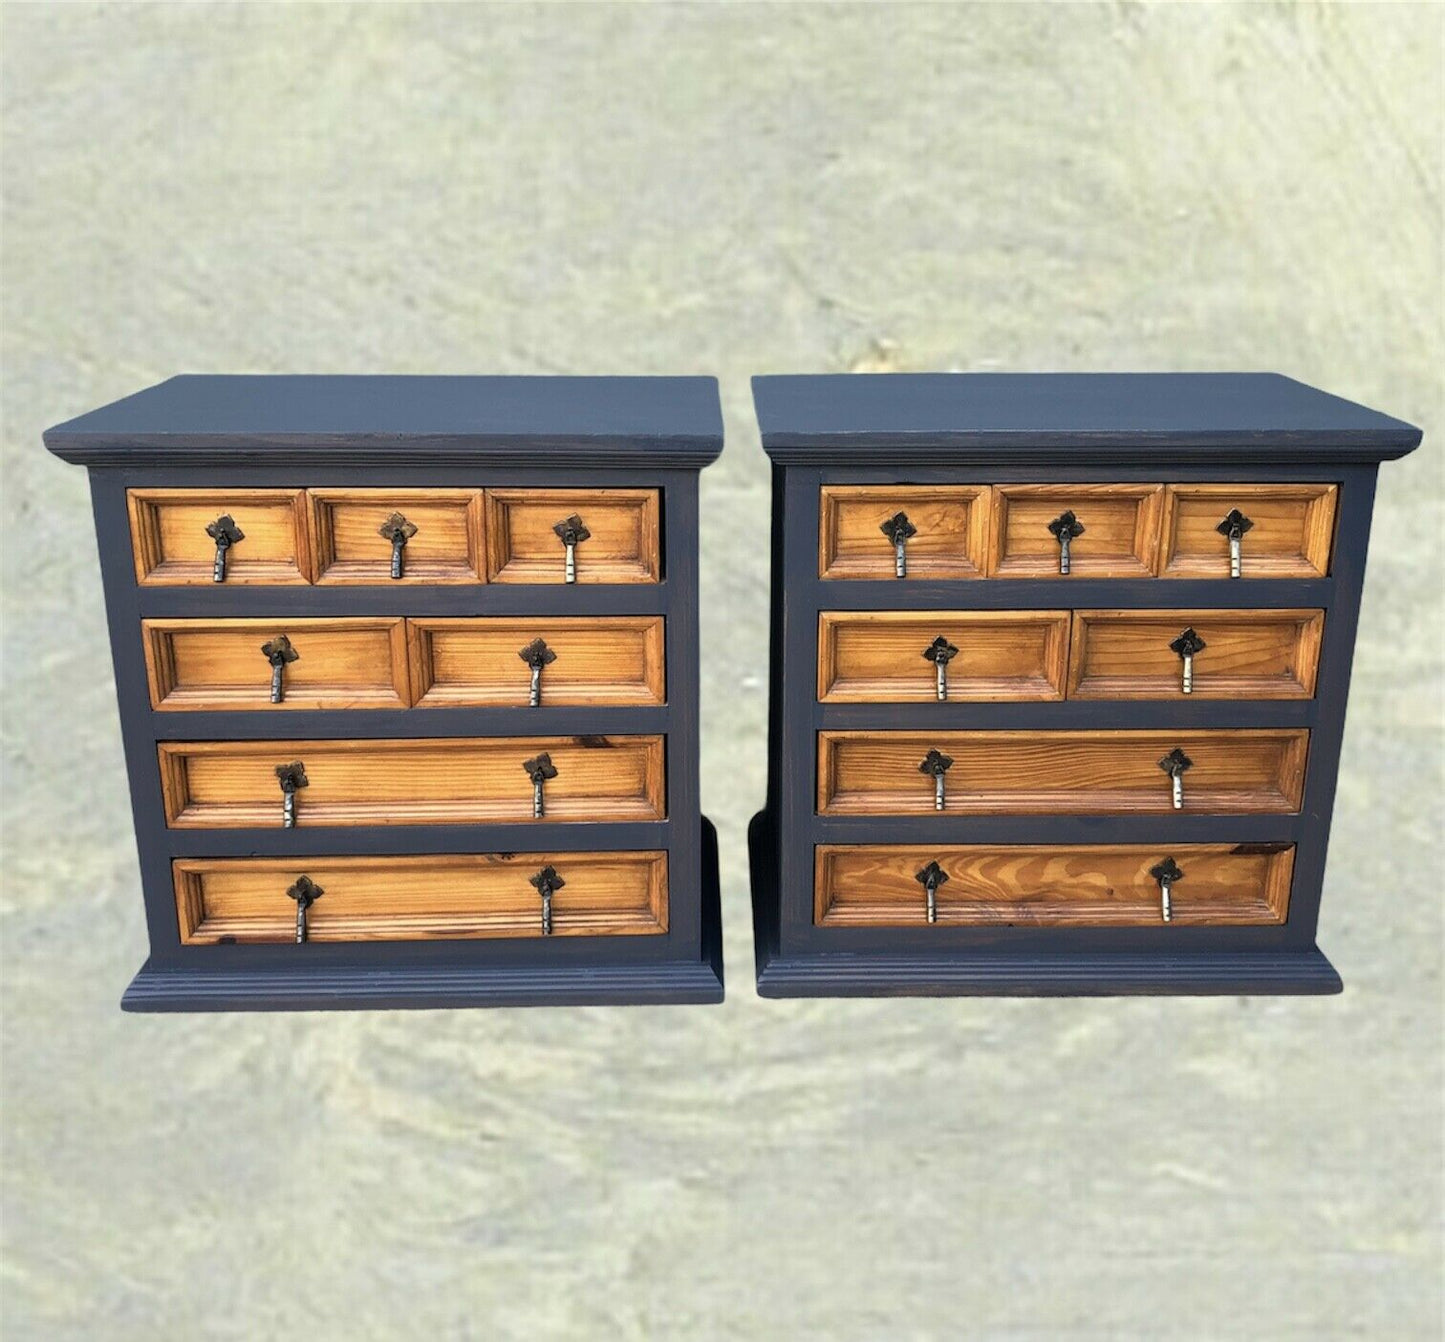 Handsome Pair Of Pine Bedside Chests / Rustic Small Chests ( SOLD )